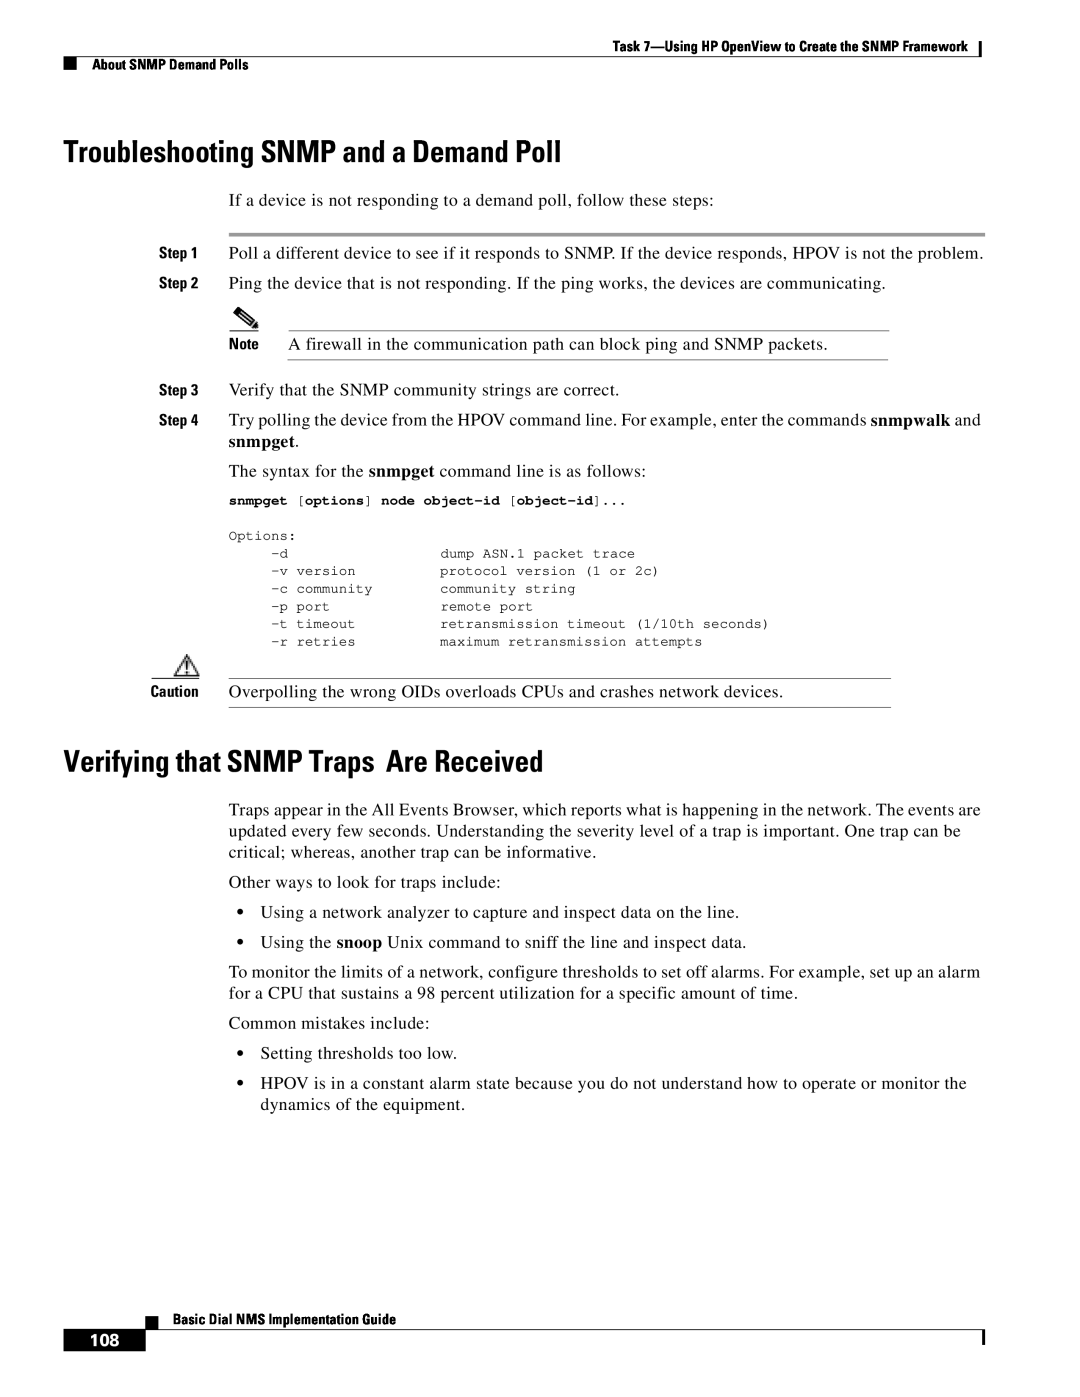 Cisco Systems Dial NMS manual Troubleshooting SNMP and a Demand Poll, Verifying that SNMP Traps Are Received 